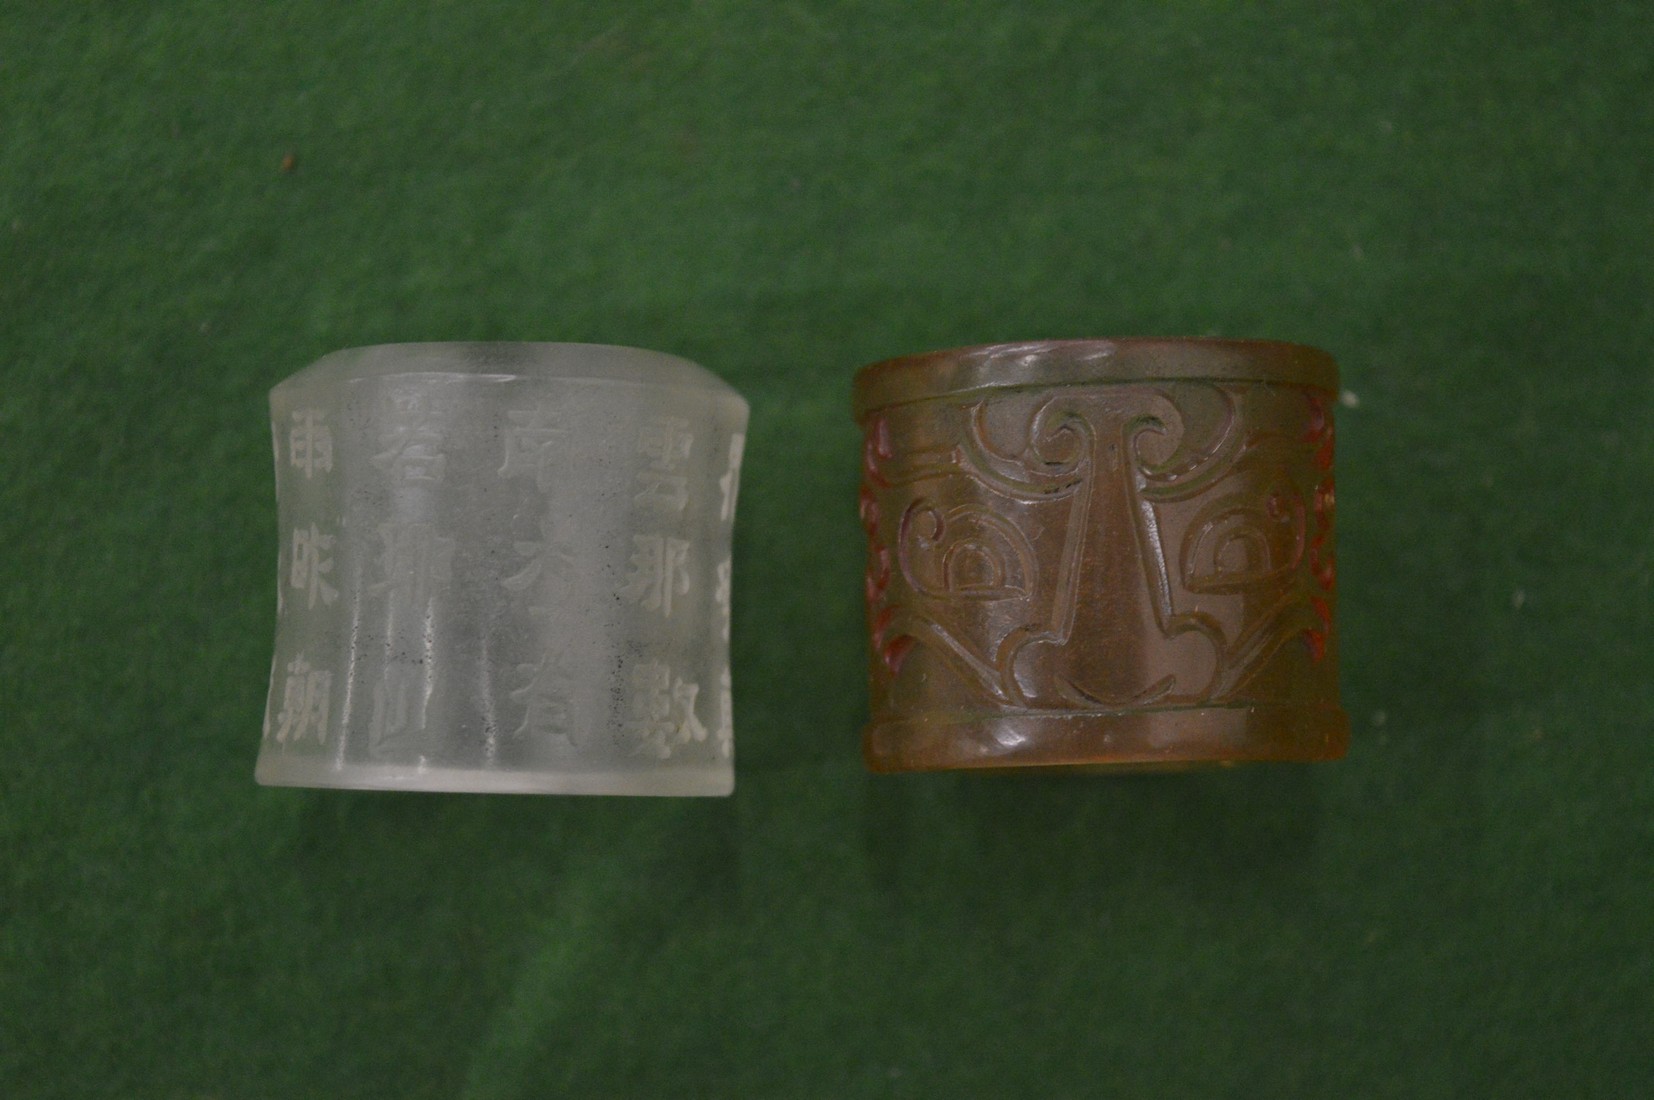 Two archers rings.